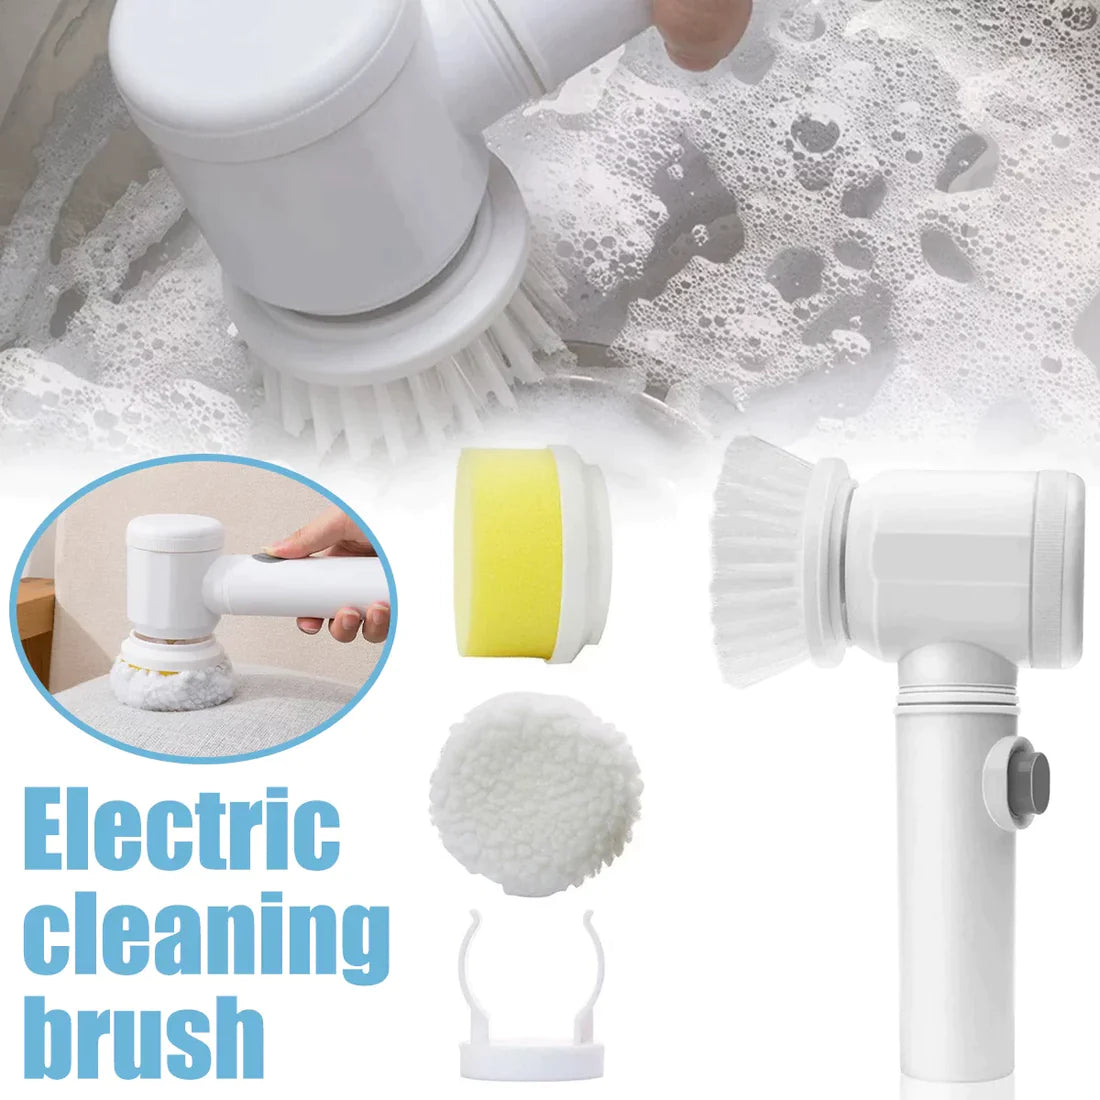 5 in 1 Magic Cleaning Brush – Discounters